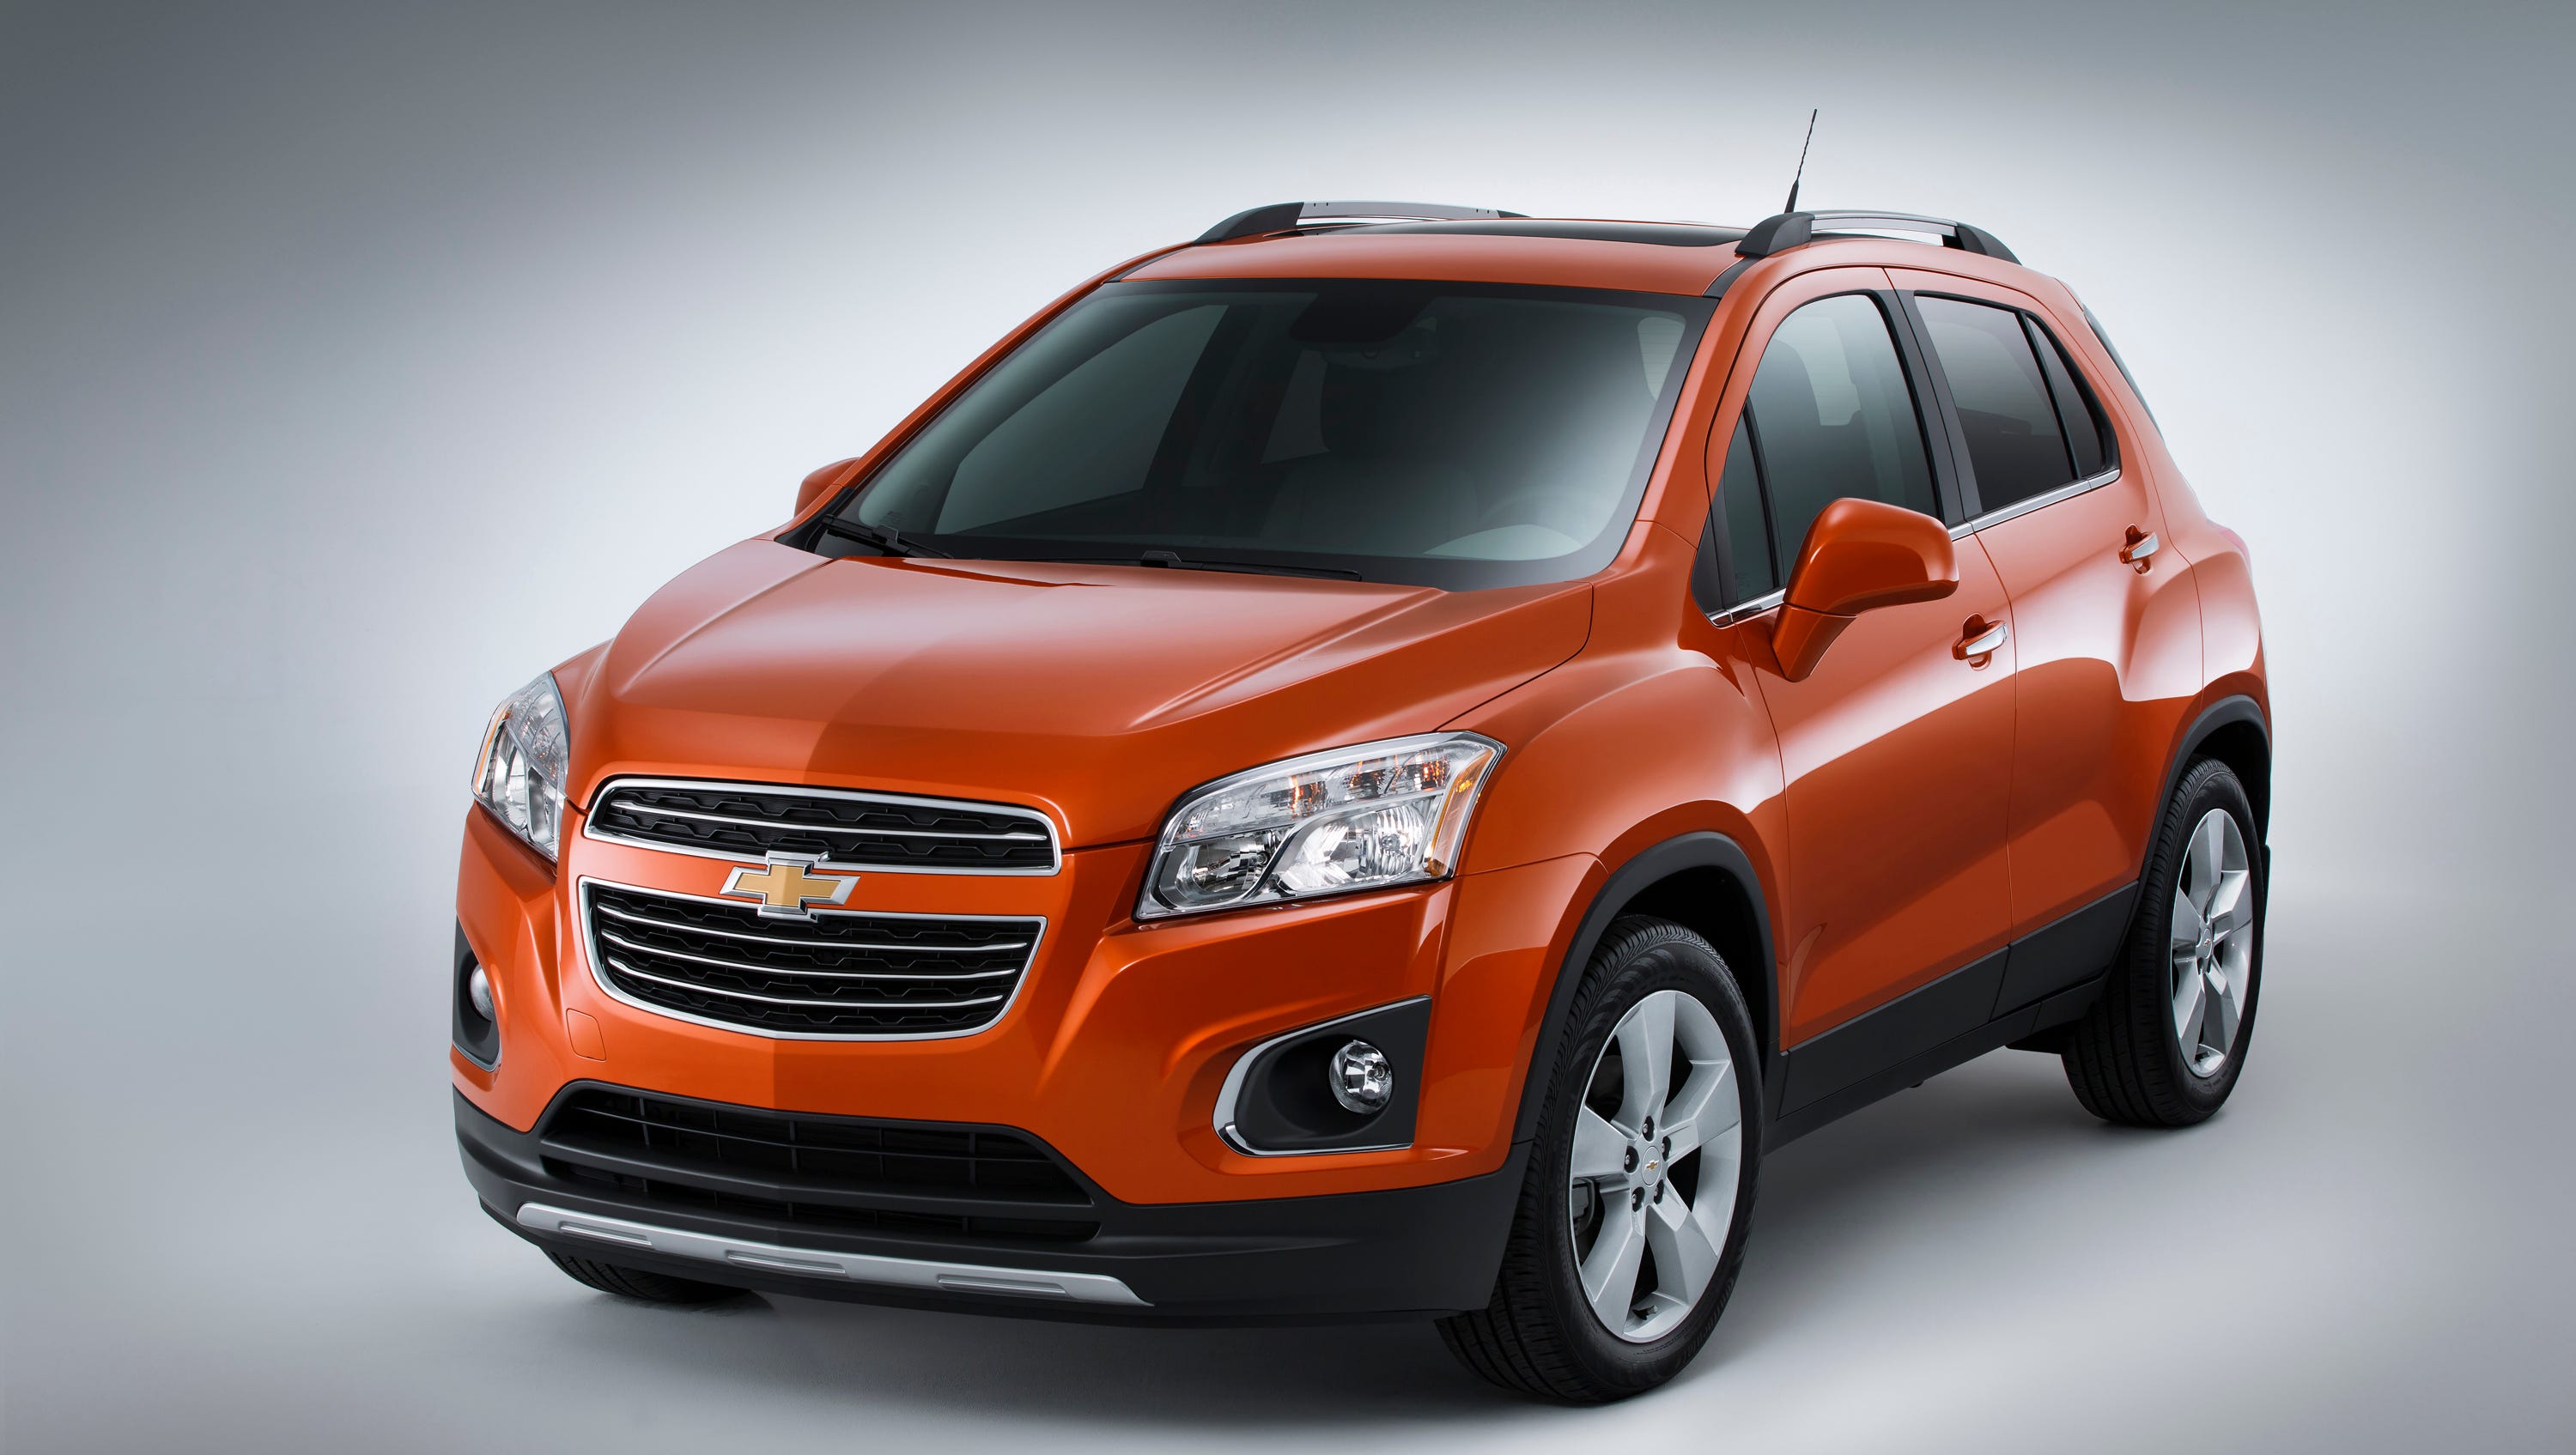 2015 Chevy Trax comes to U.S. with rivals right behind it